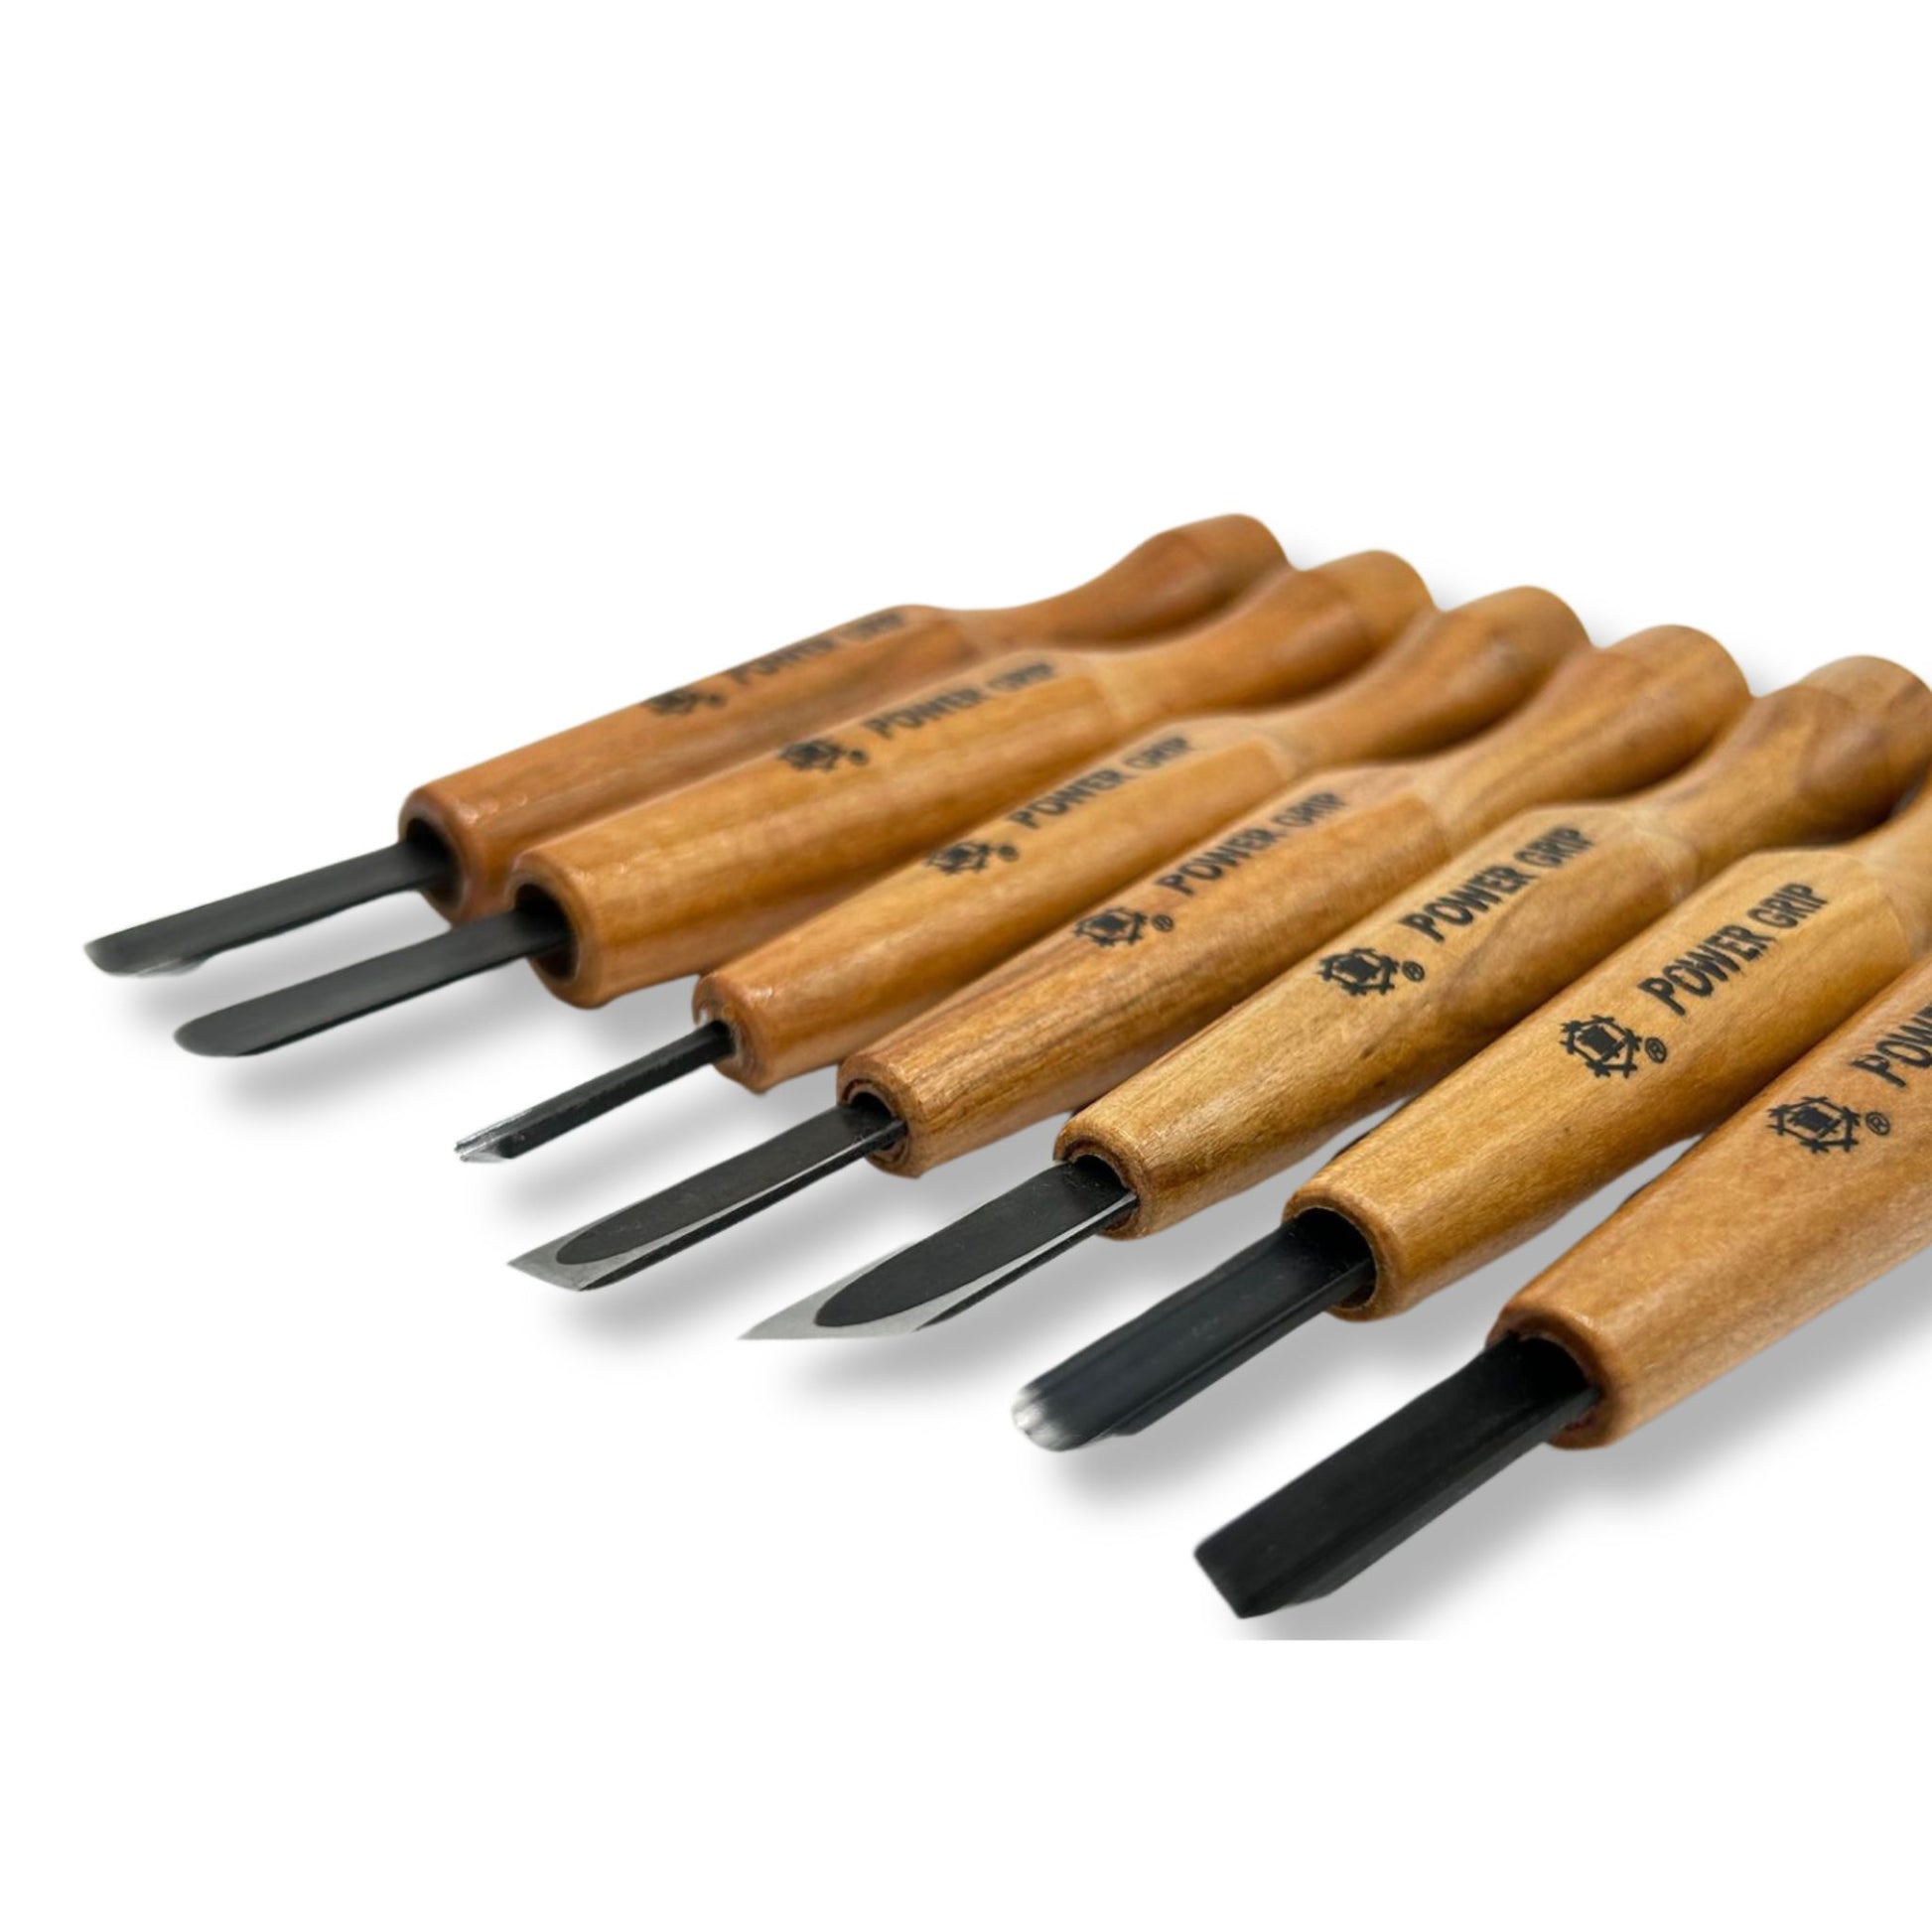 Mikisyo Power Grip Woodcarving 4-Piece Set Gouges & Chisels Wood